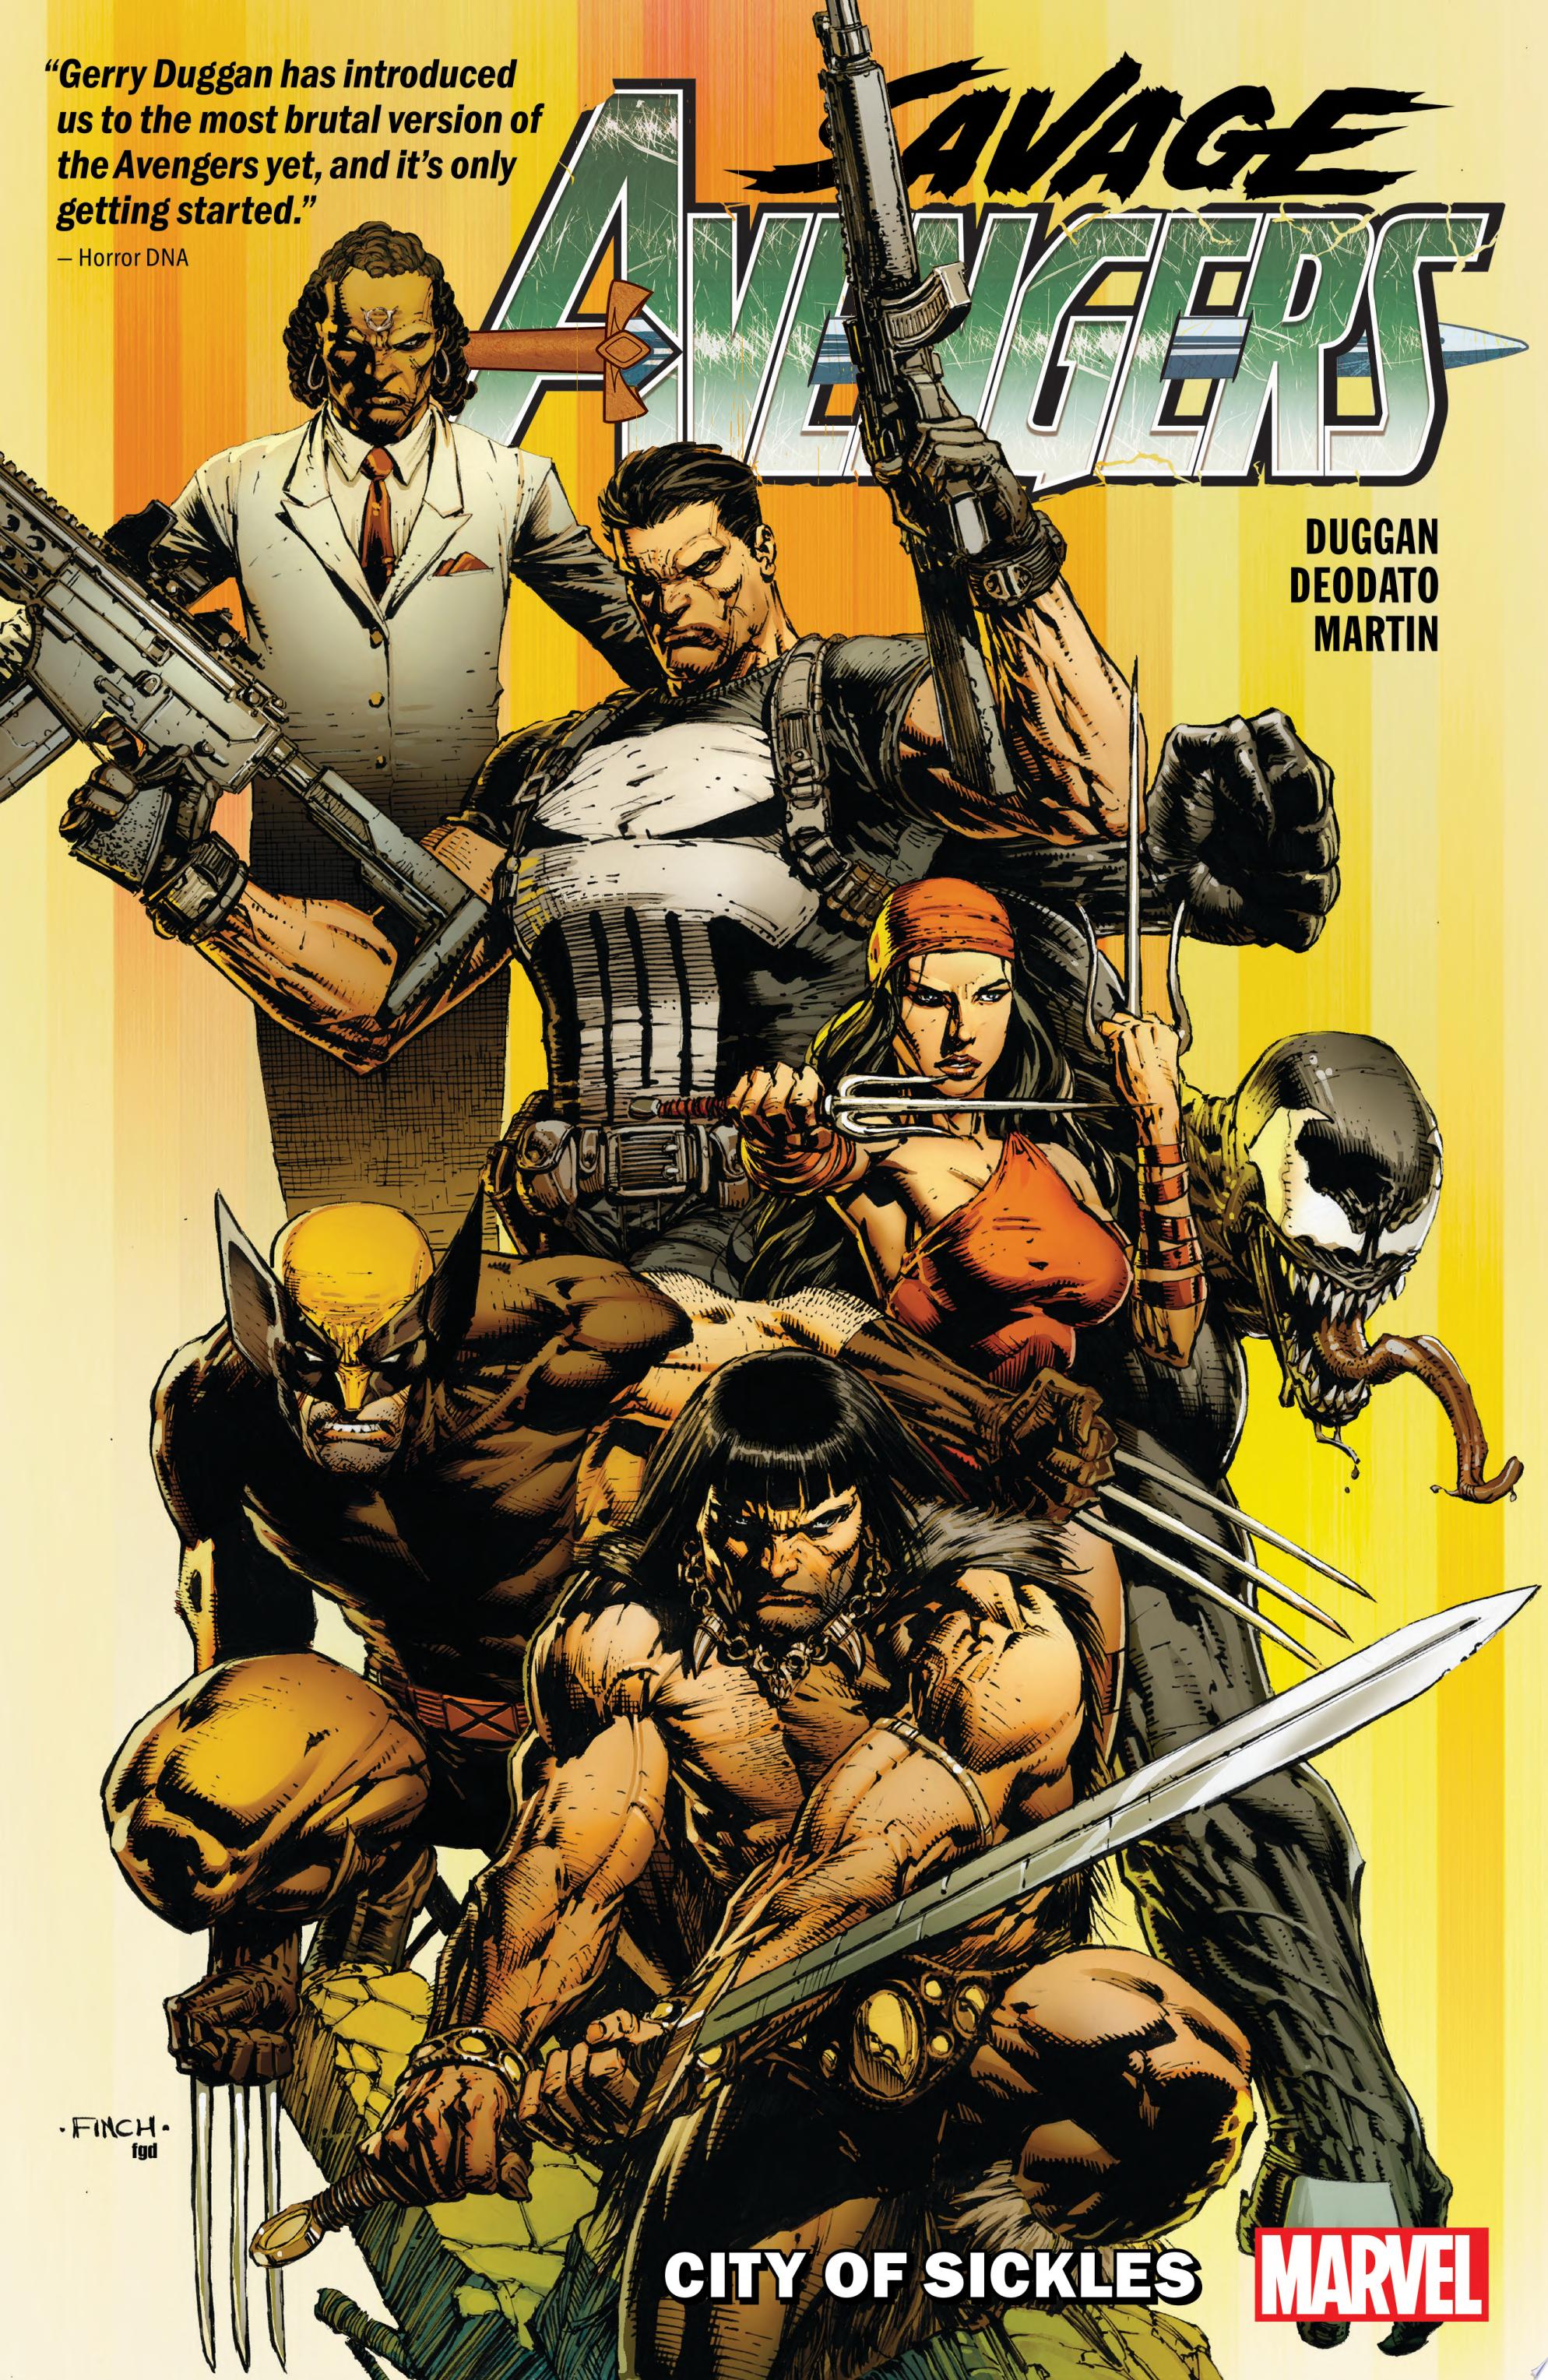 Image for "Savage Avengers Vol. 1"